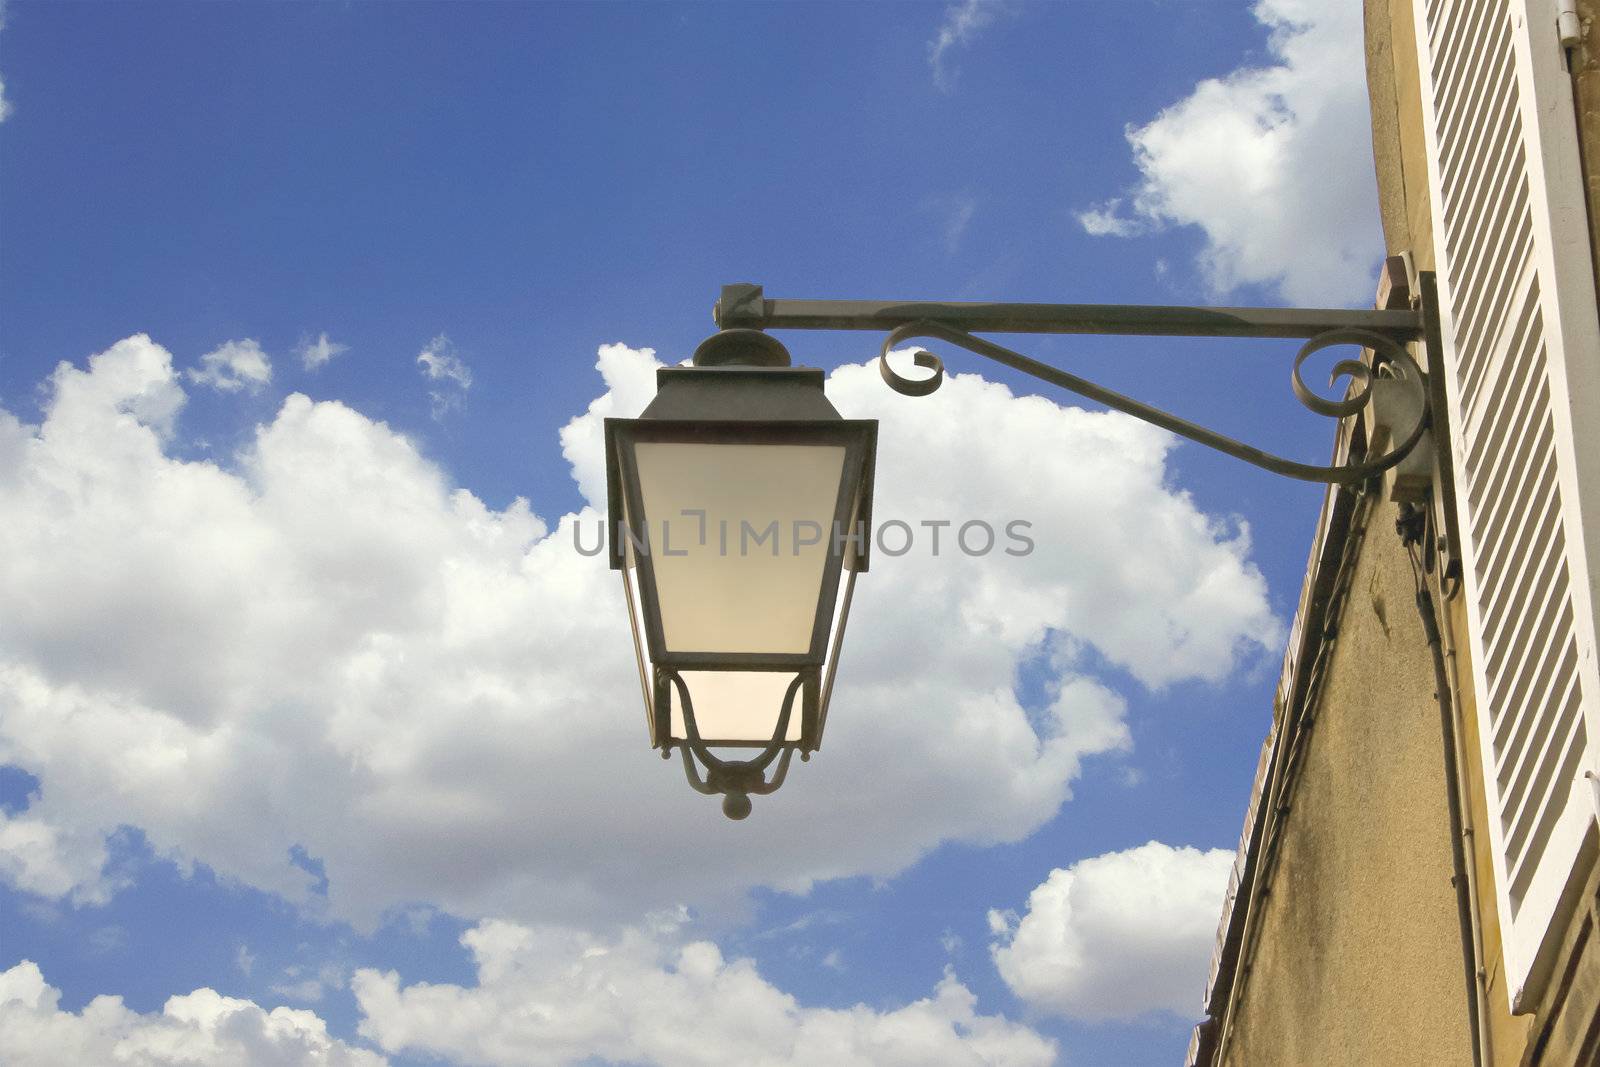 Lantern on the facade of old French house